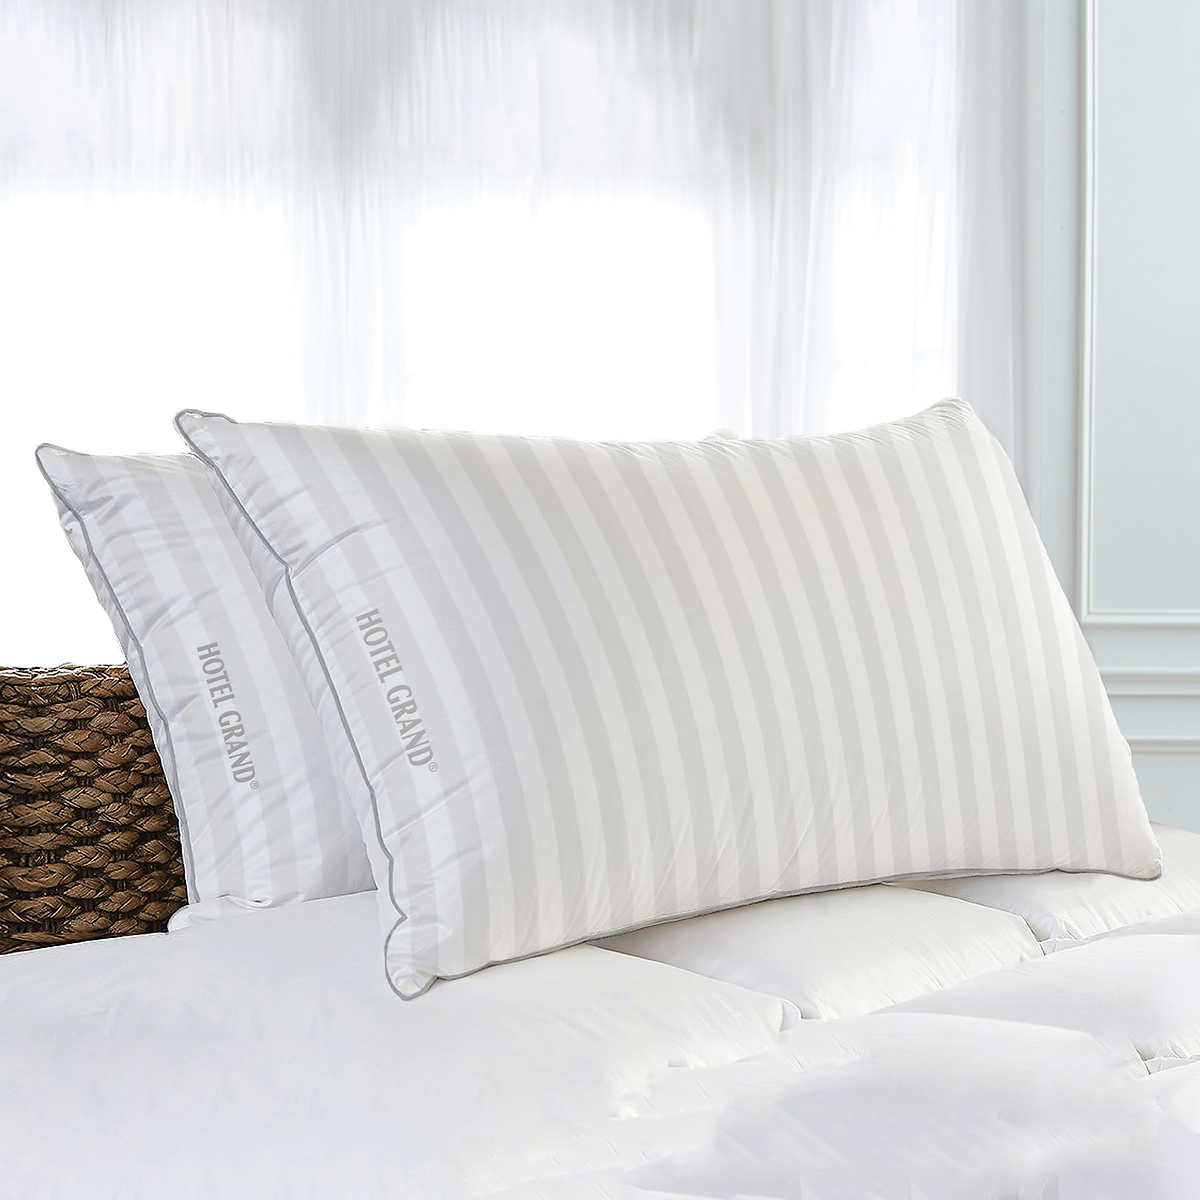 DUCK FEATHER TWIN PACK PILLOWS LUXURIOUS INNER FILLER PAD COTTON COVER WHITE 